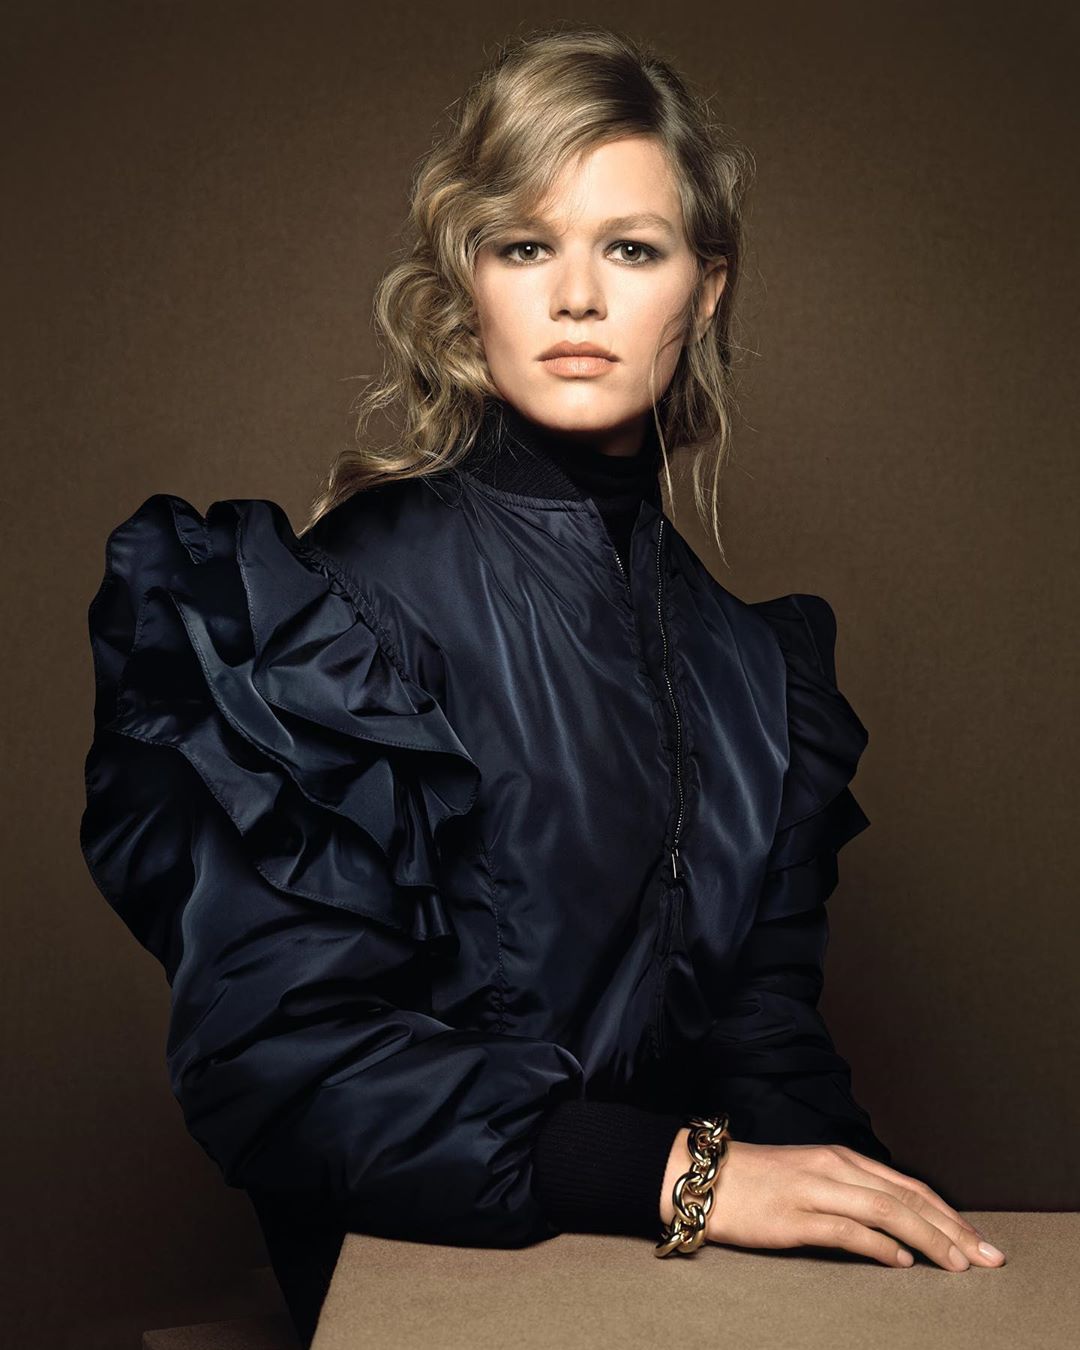 Max Mara - Romantic ruffles. Pleats and gathers play a centrol role in the #MaxMara #FW20 collection, like this new cropped bomber jacket in taffeta worn by @annaewers for the #MaxMaraFW20 campaign sh...